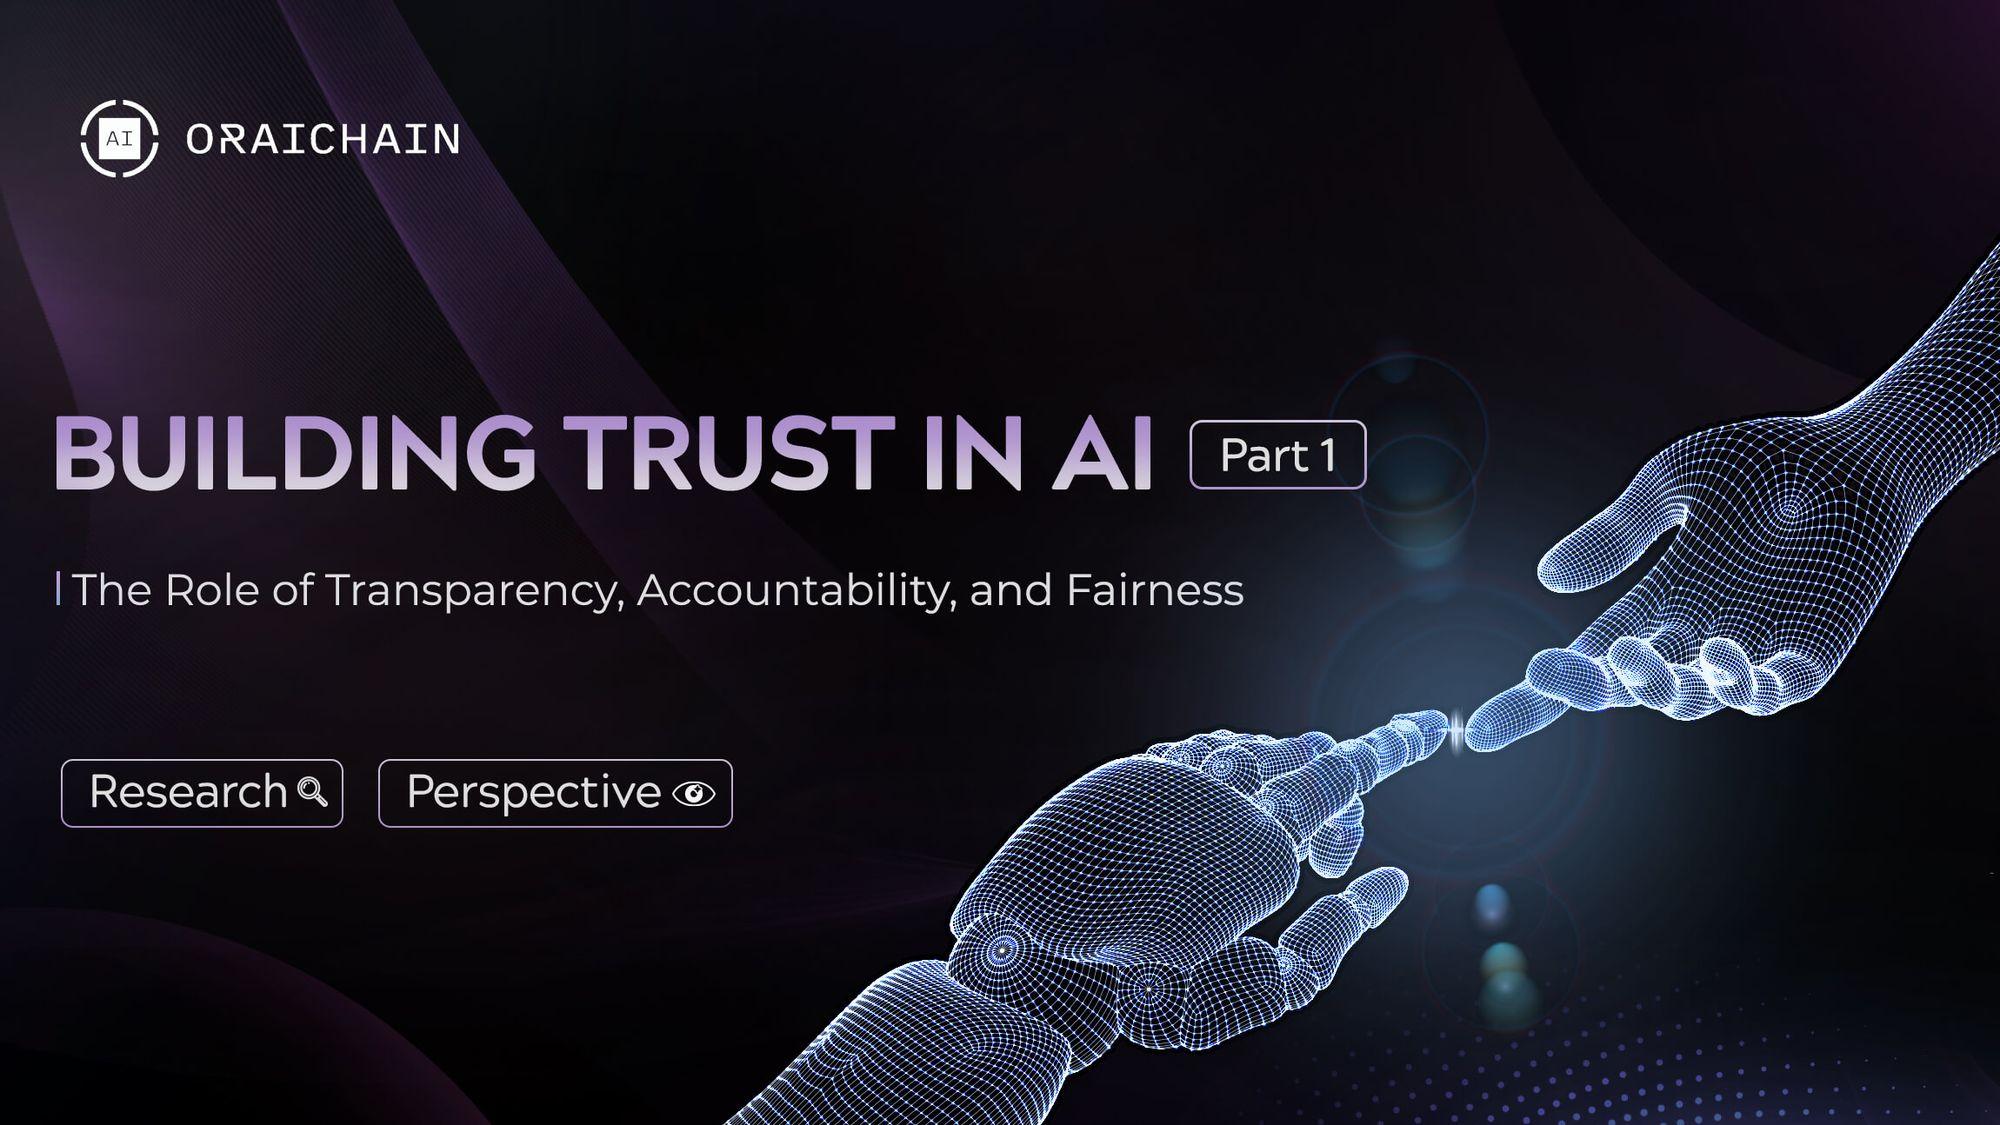 Building Trust in AI (Part 1): The Role of Transparency, Accountability, and Fairness